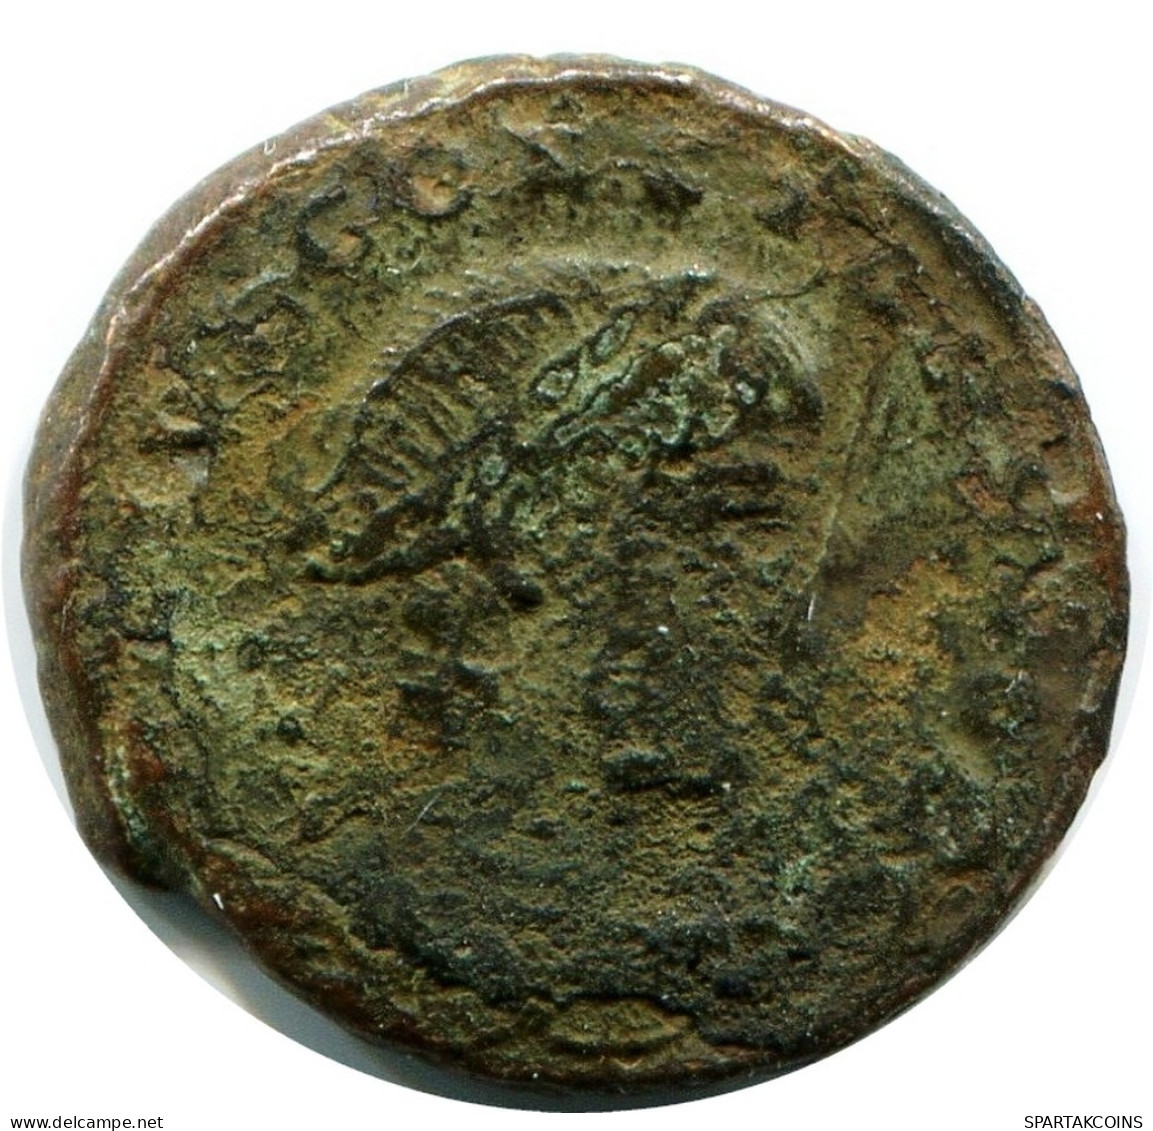 CONSTANS MINTED IN ANTIOCH FOUND IN IHNASYAH HOARD EGYPT #ANC11833.14.U.A - The Christian Empire (307 AD Tot 363 AD)